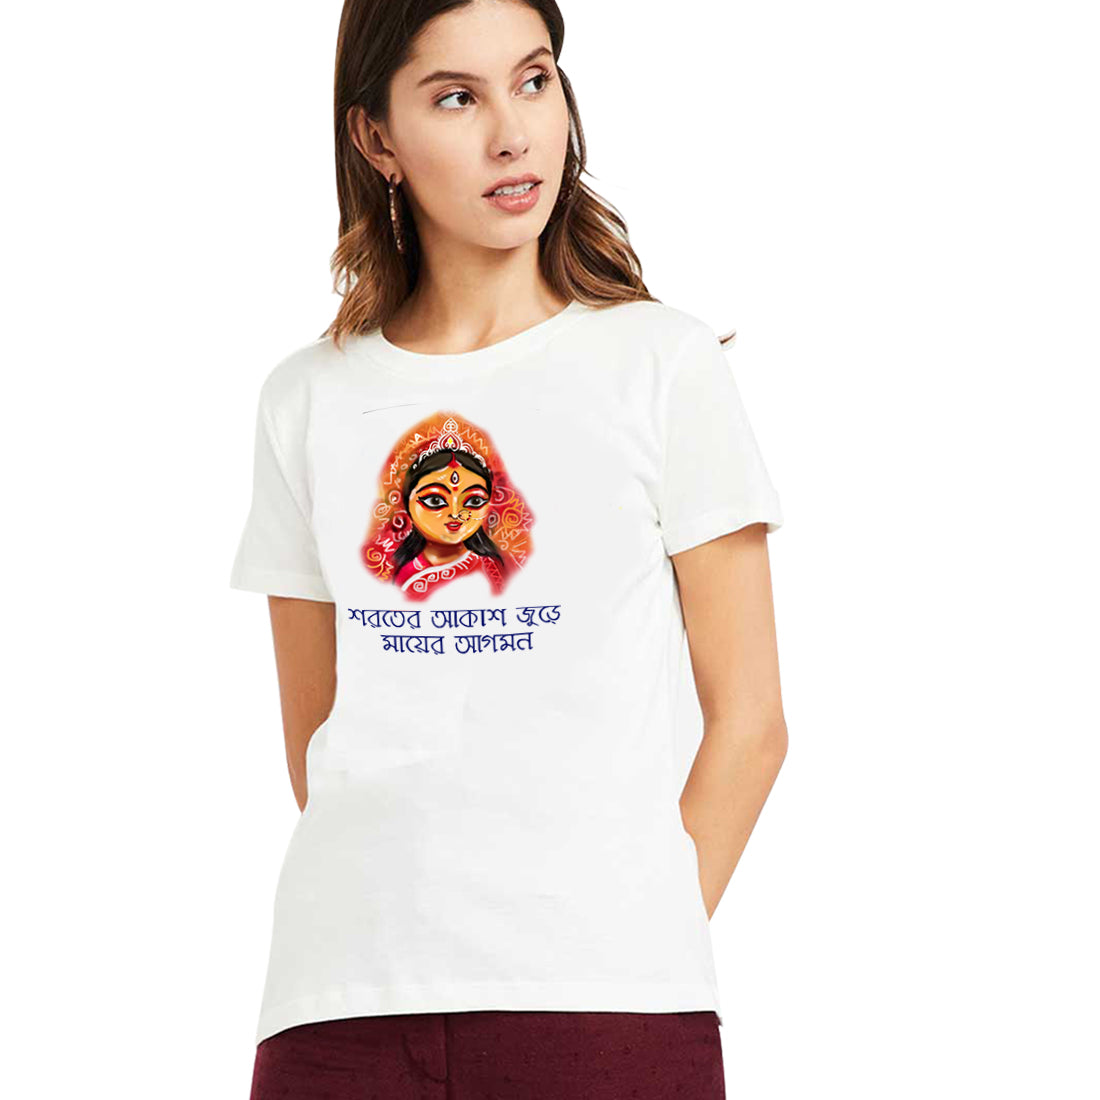 Durga puja/Festival/Ocession Celebration of Puja _Customized T-Shirt for Women